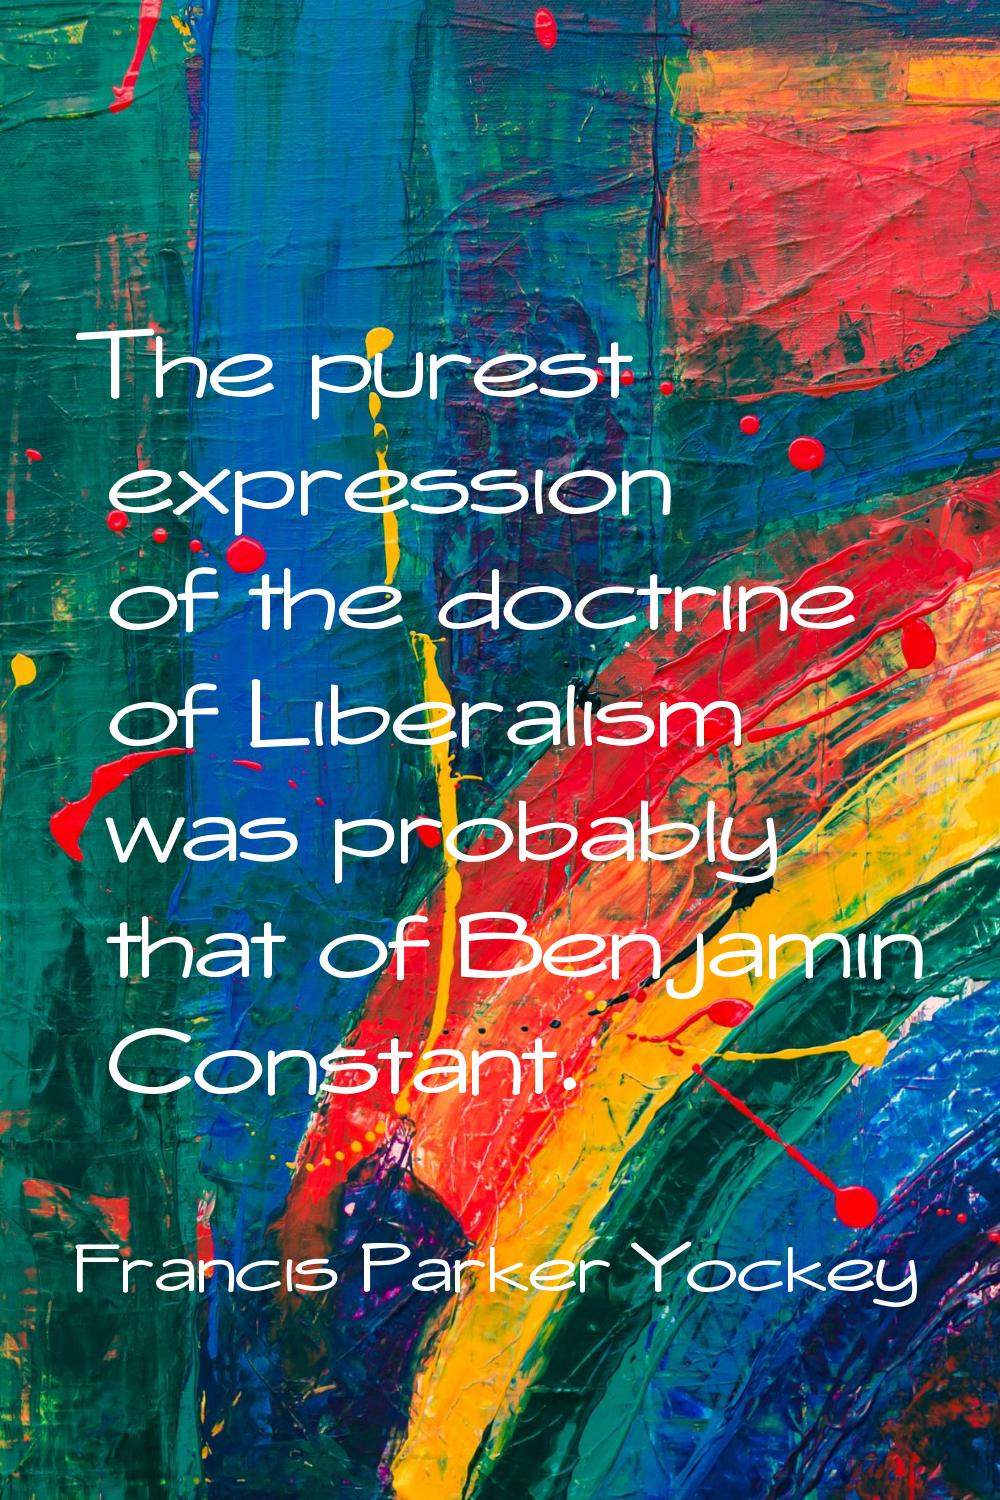 The purest expression of the doctrine of Liberalism was probably that of Benjamin Constant.